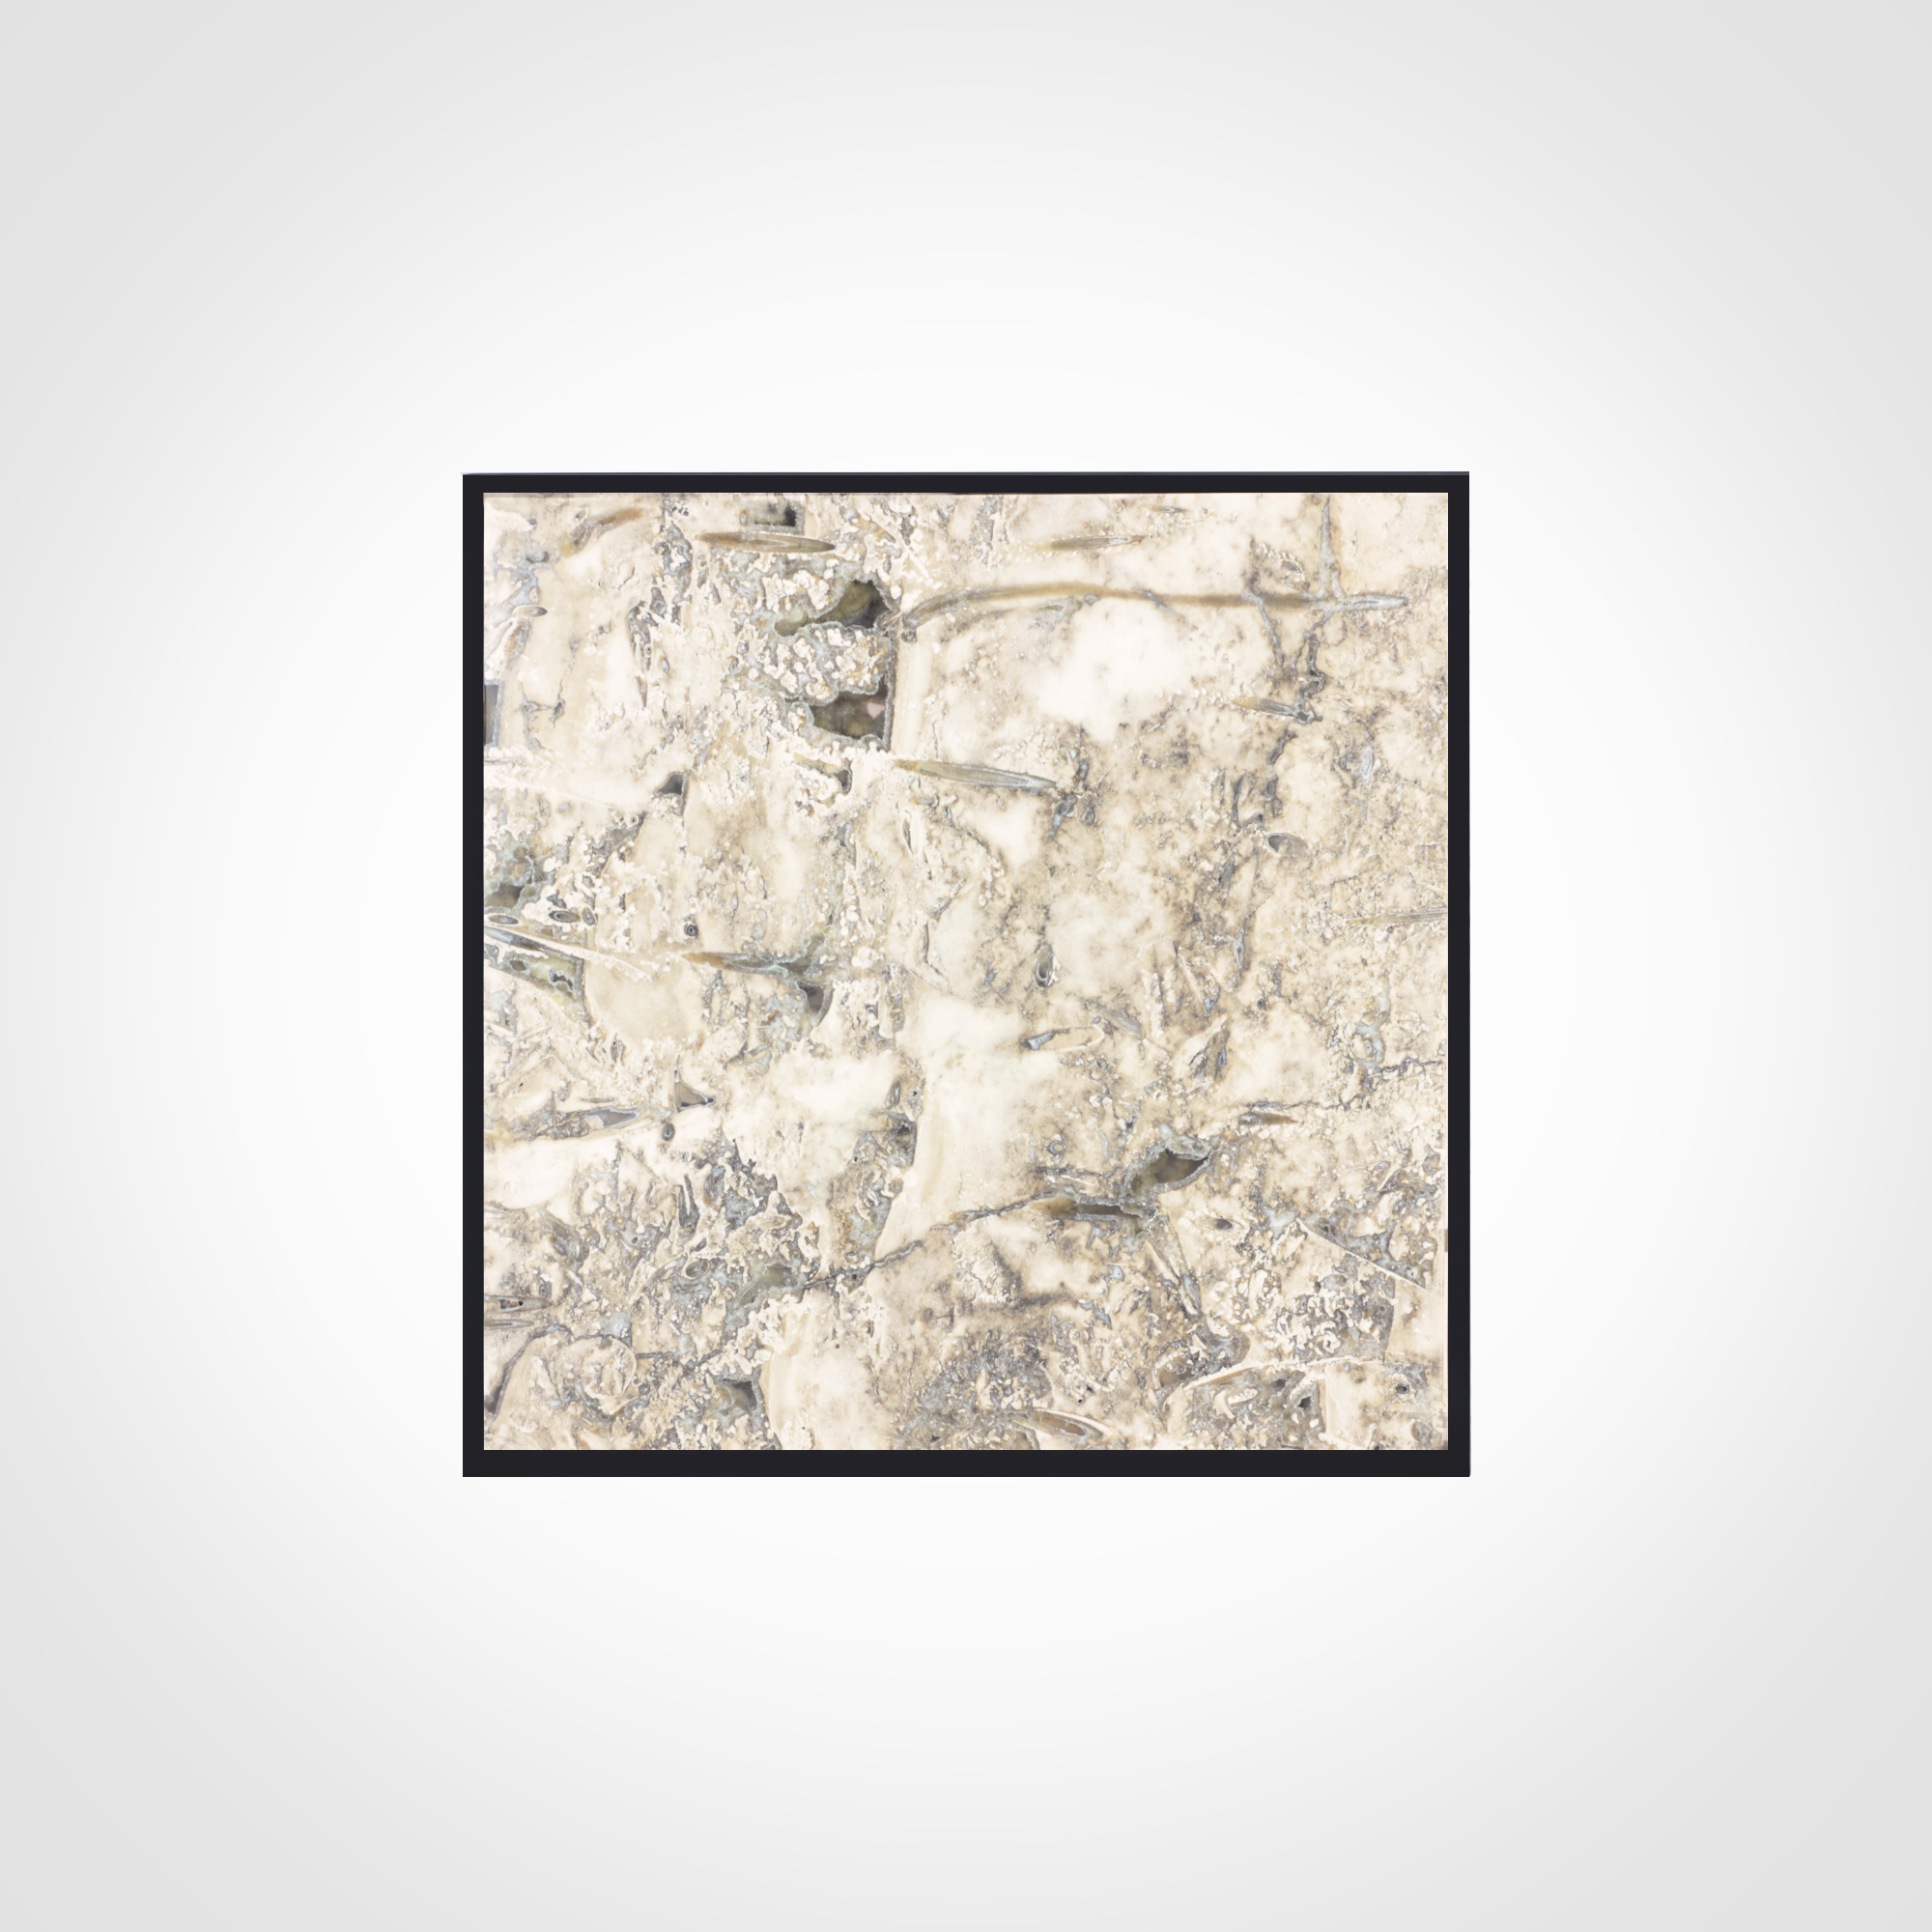 FramE - Fossil travertine side table